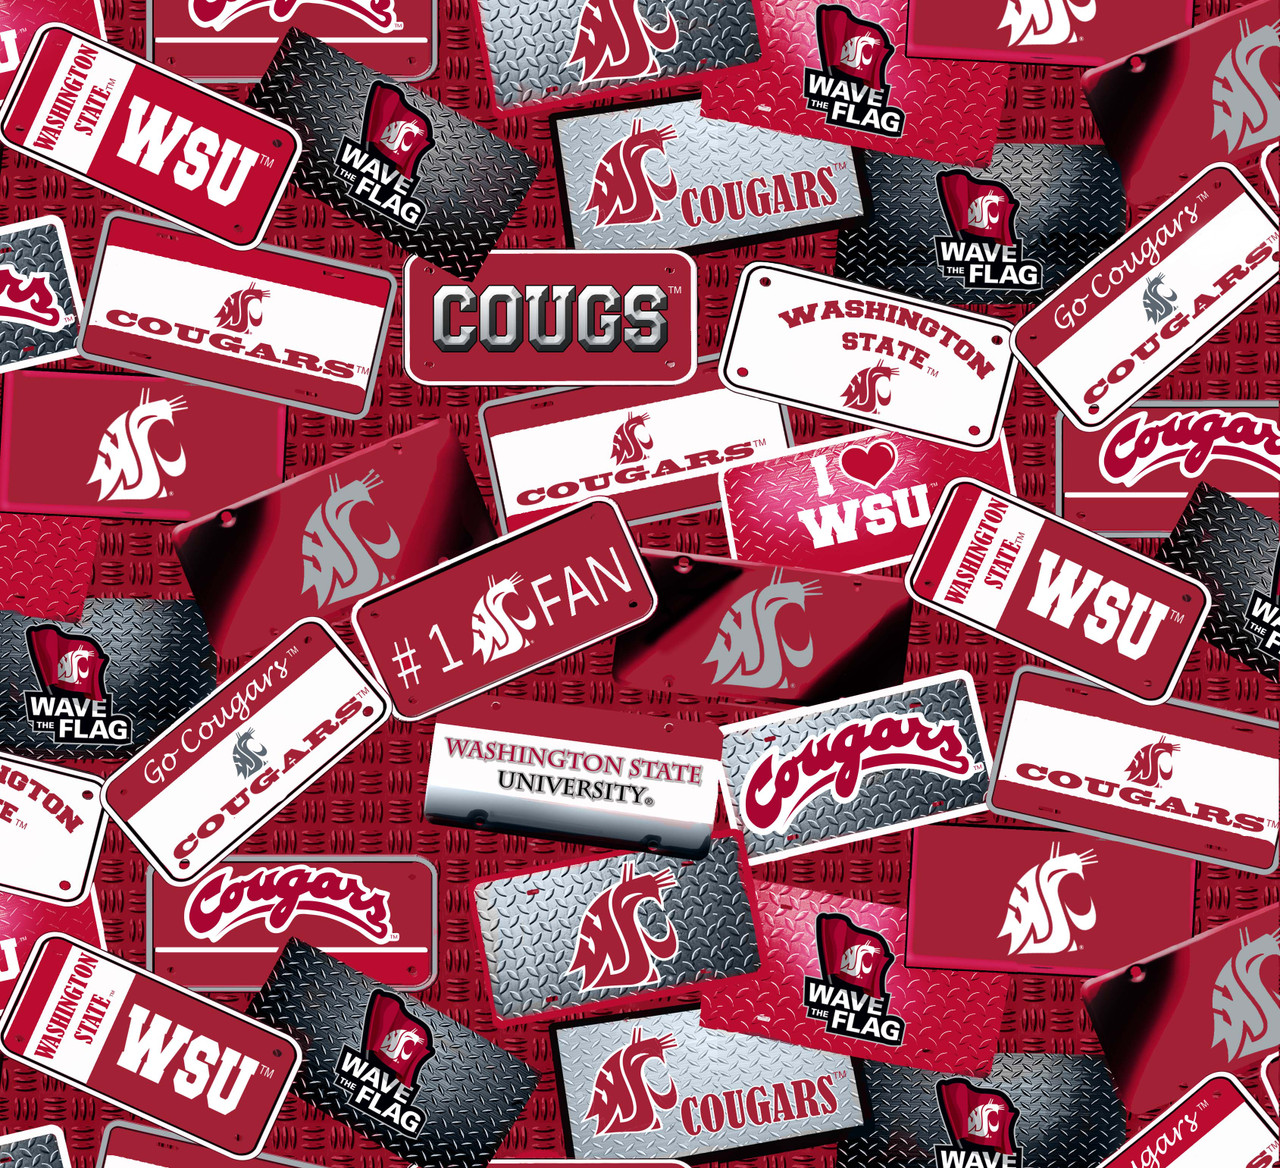 Image of Washington State University WSU Cougars Cotton Fabric with License Plate Print and Matching Solid Cotton Fabrics